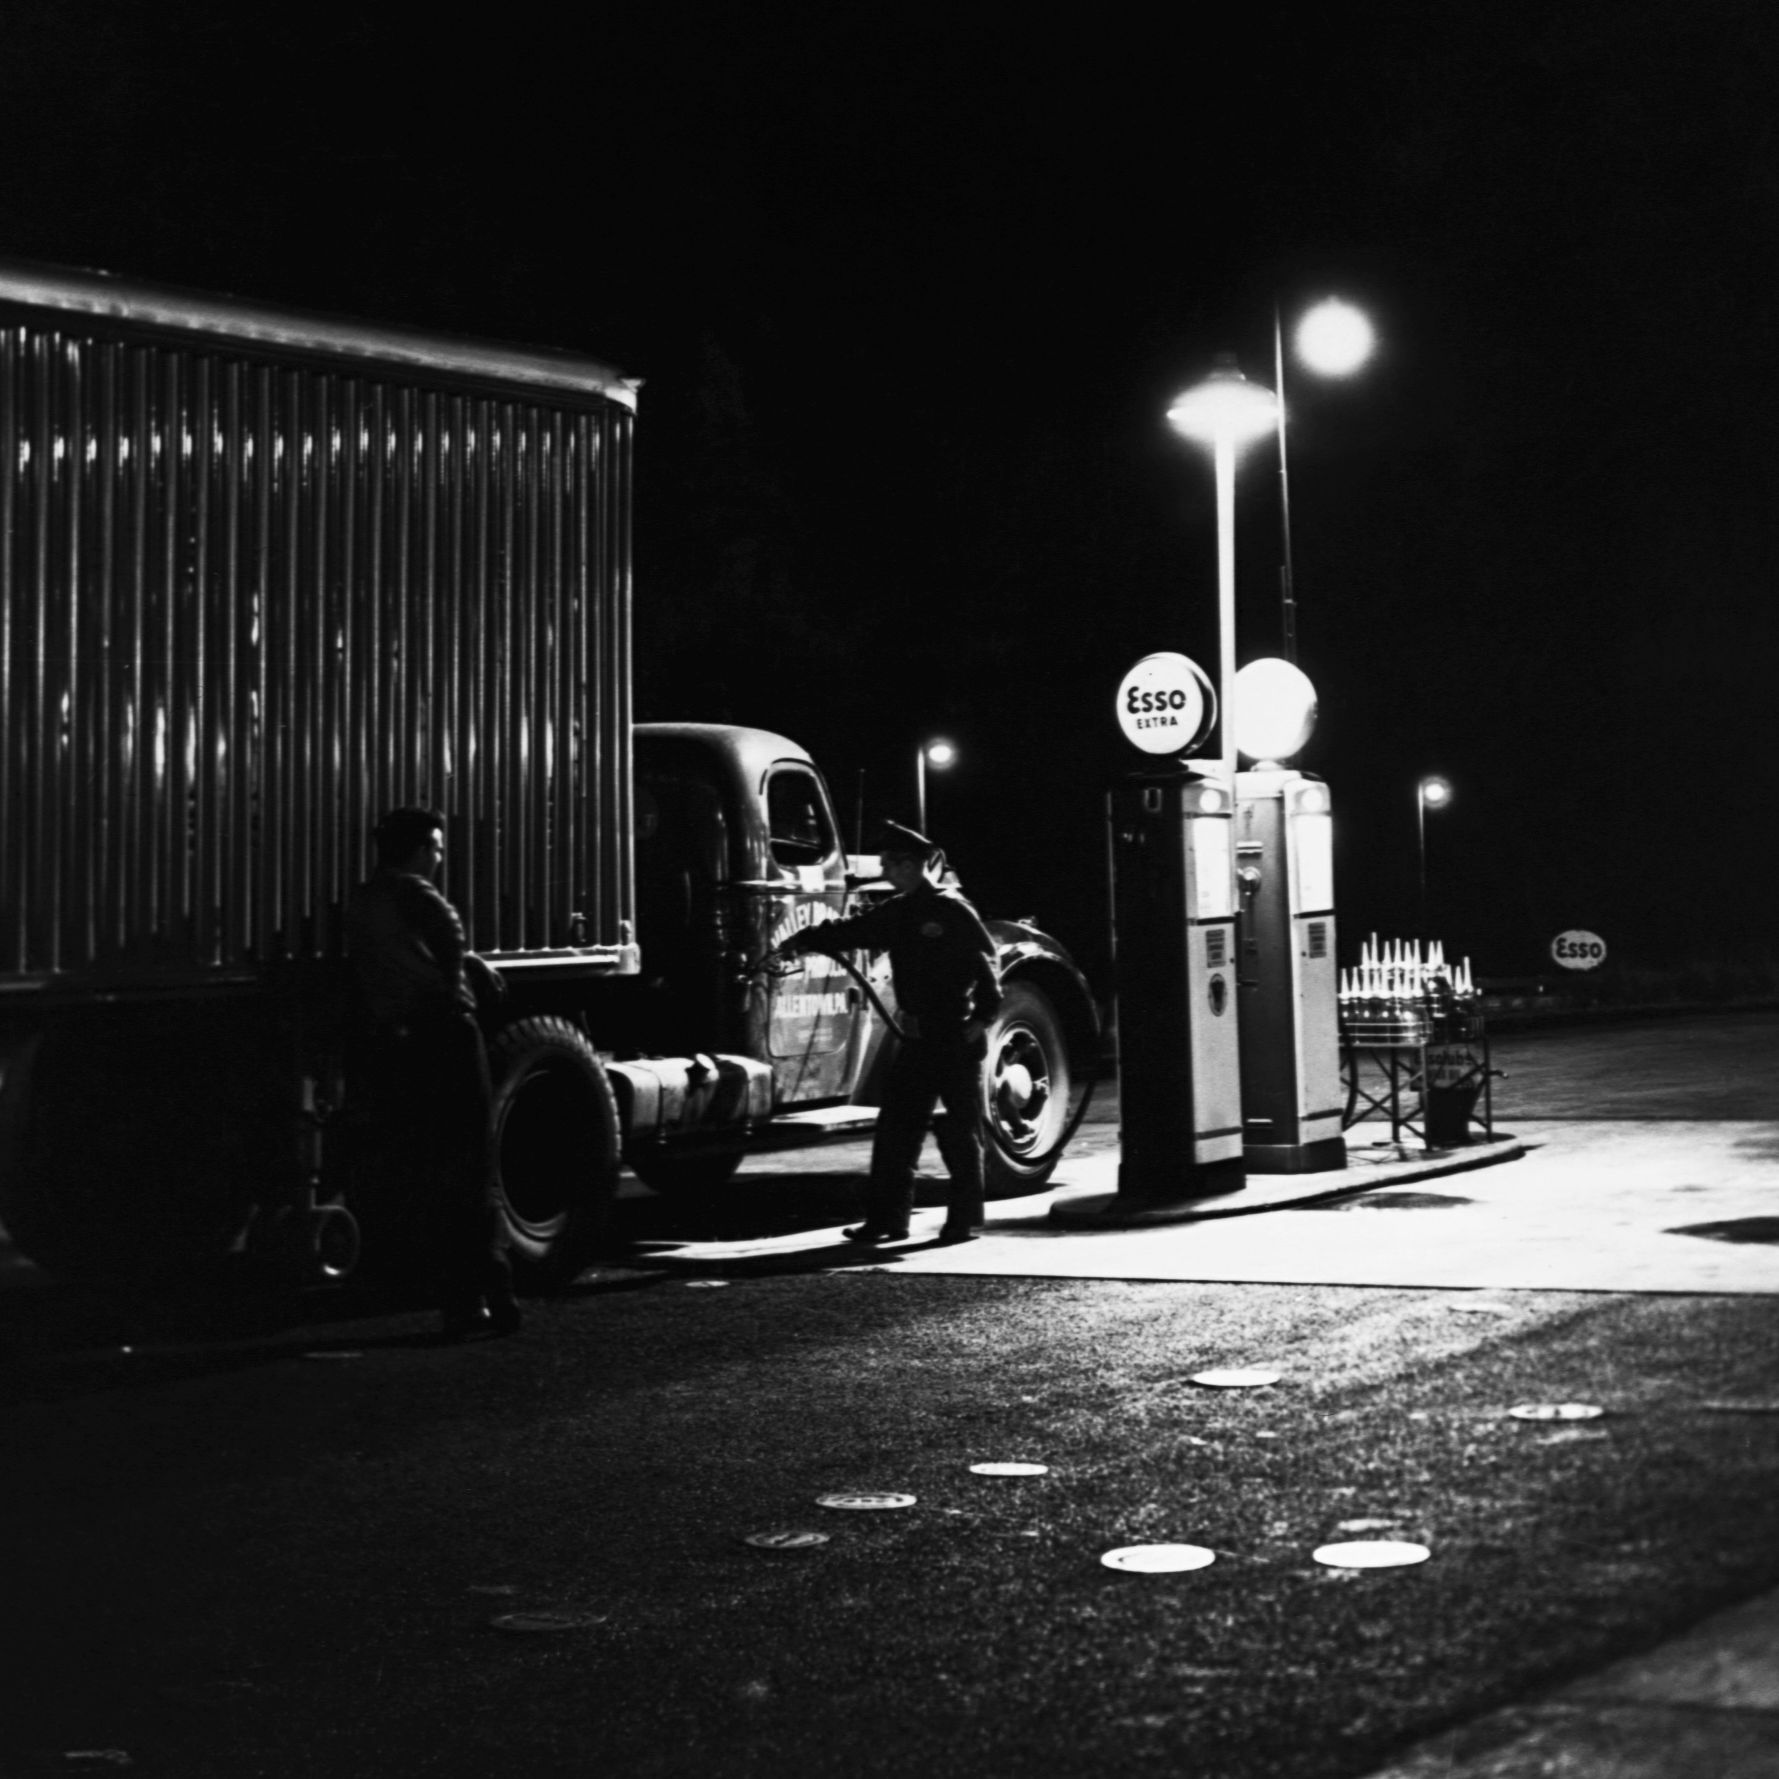 fueling truck at filling station